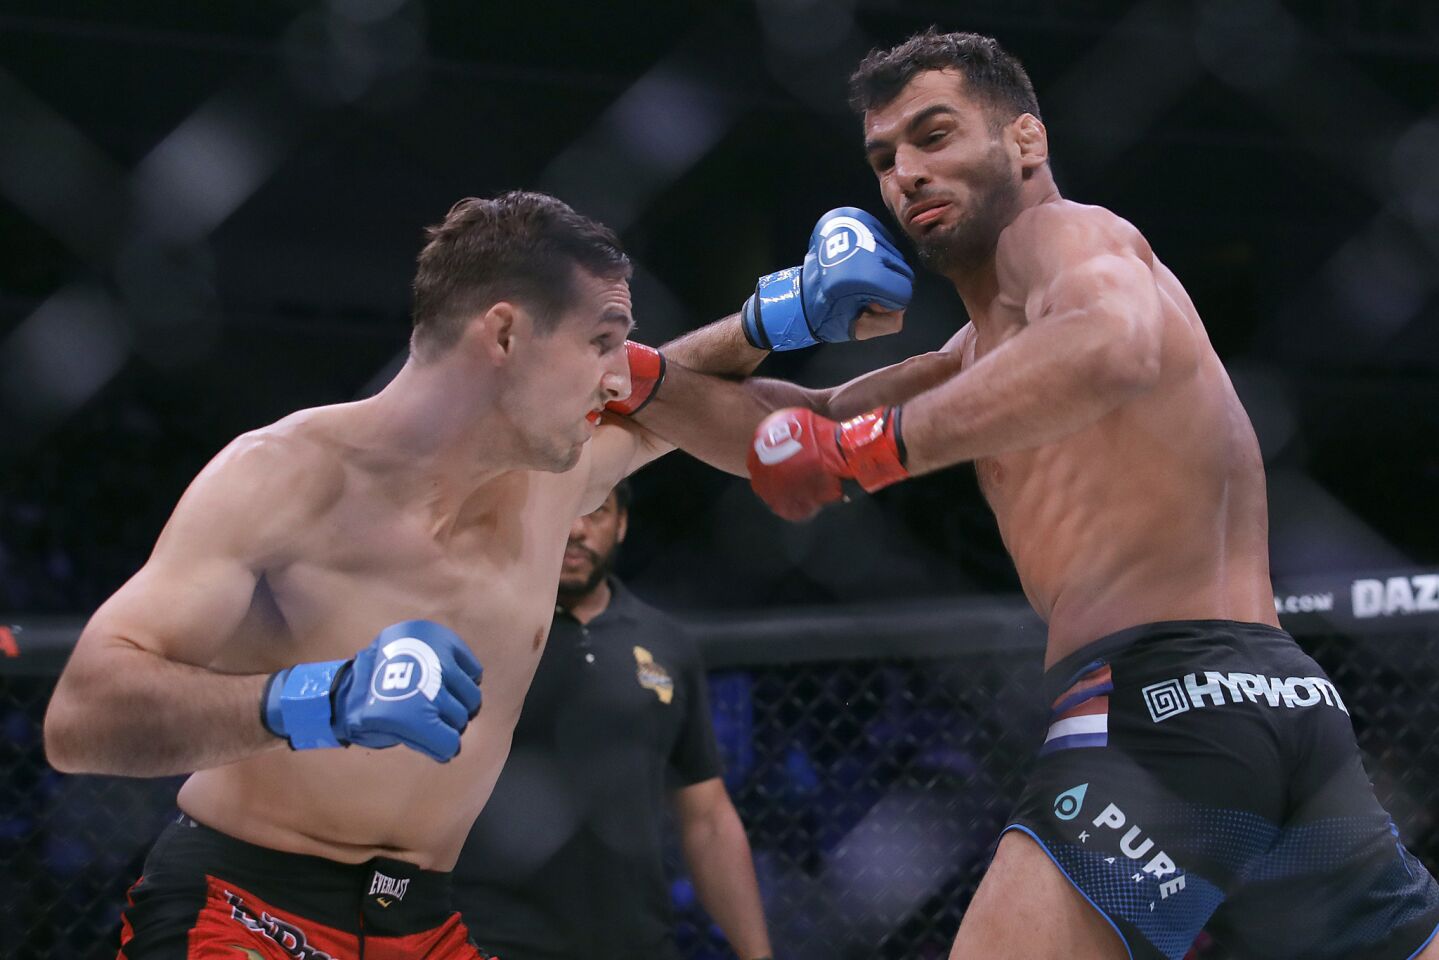 Rory MacDonald, left, trades punches with Gegard Mousasi during a middleweight world title mixed martial arts bout at Bellator 206 in San Jose, Calif., Saturday, Sept. 29, 2018. Mousasi won by technical knockout in the second round to retain the title. (AP Photo/Jeff Chiu)